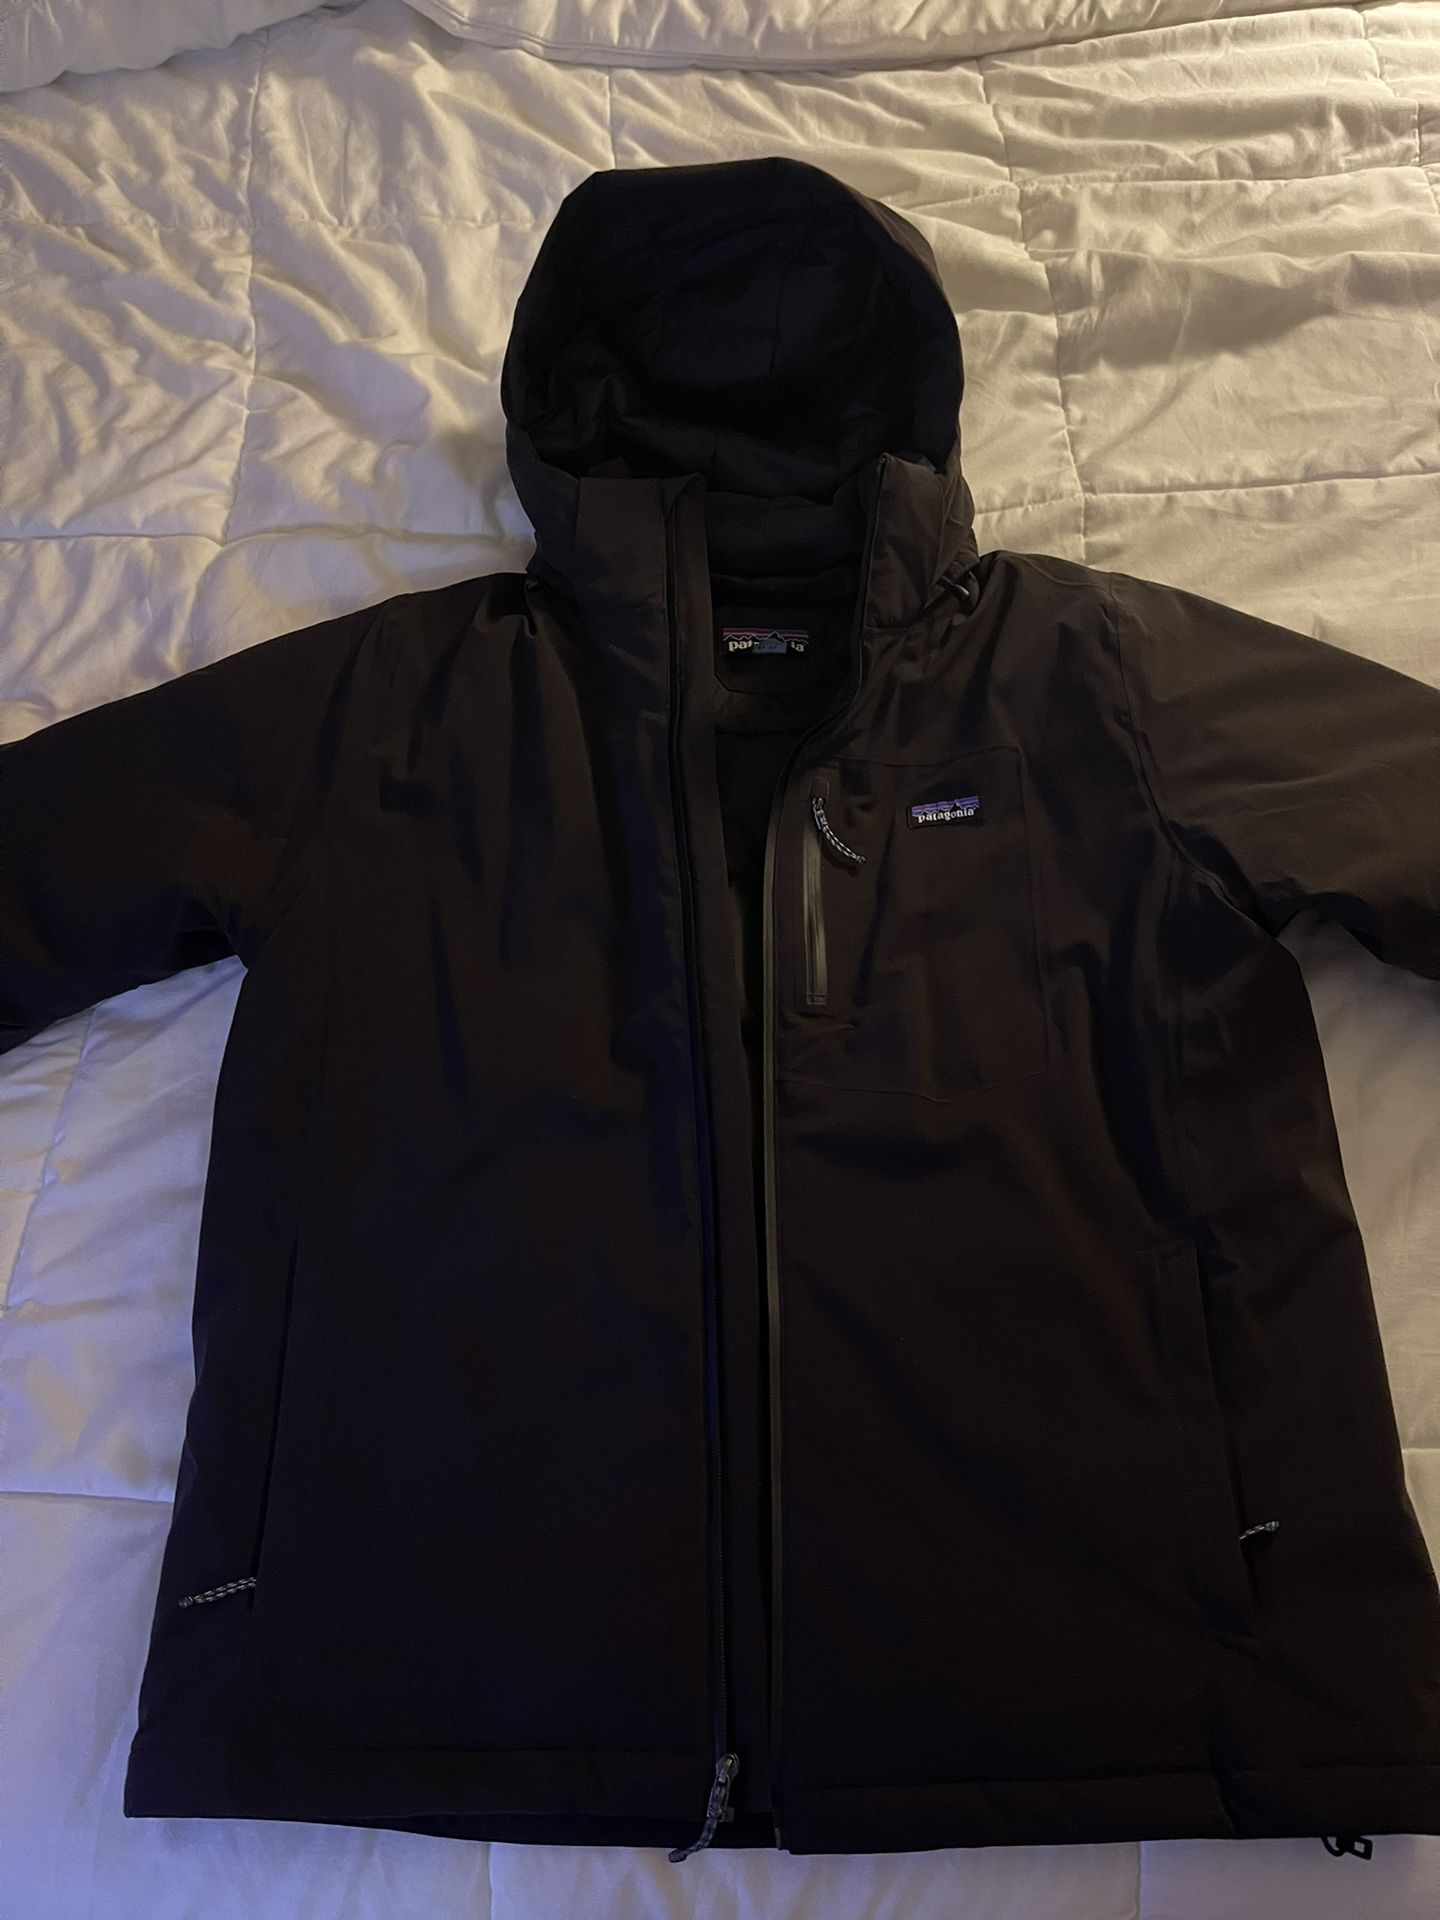 Selling XL Insulated Patagonia Jacket (New Never Worn)